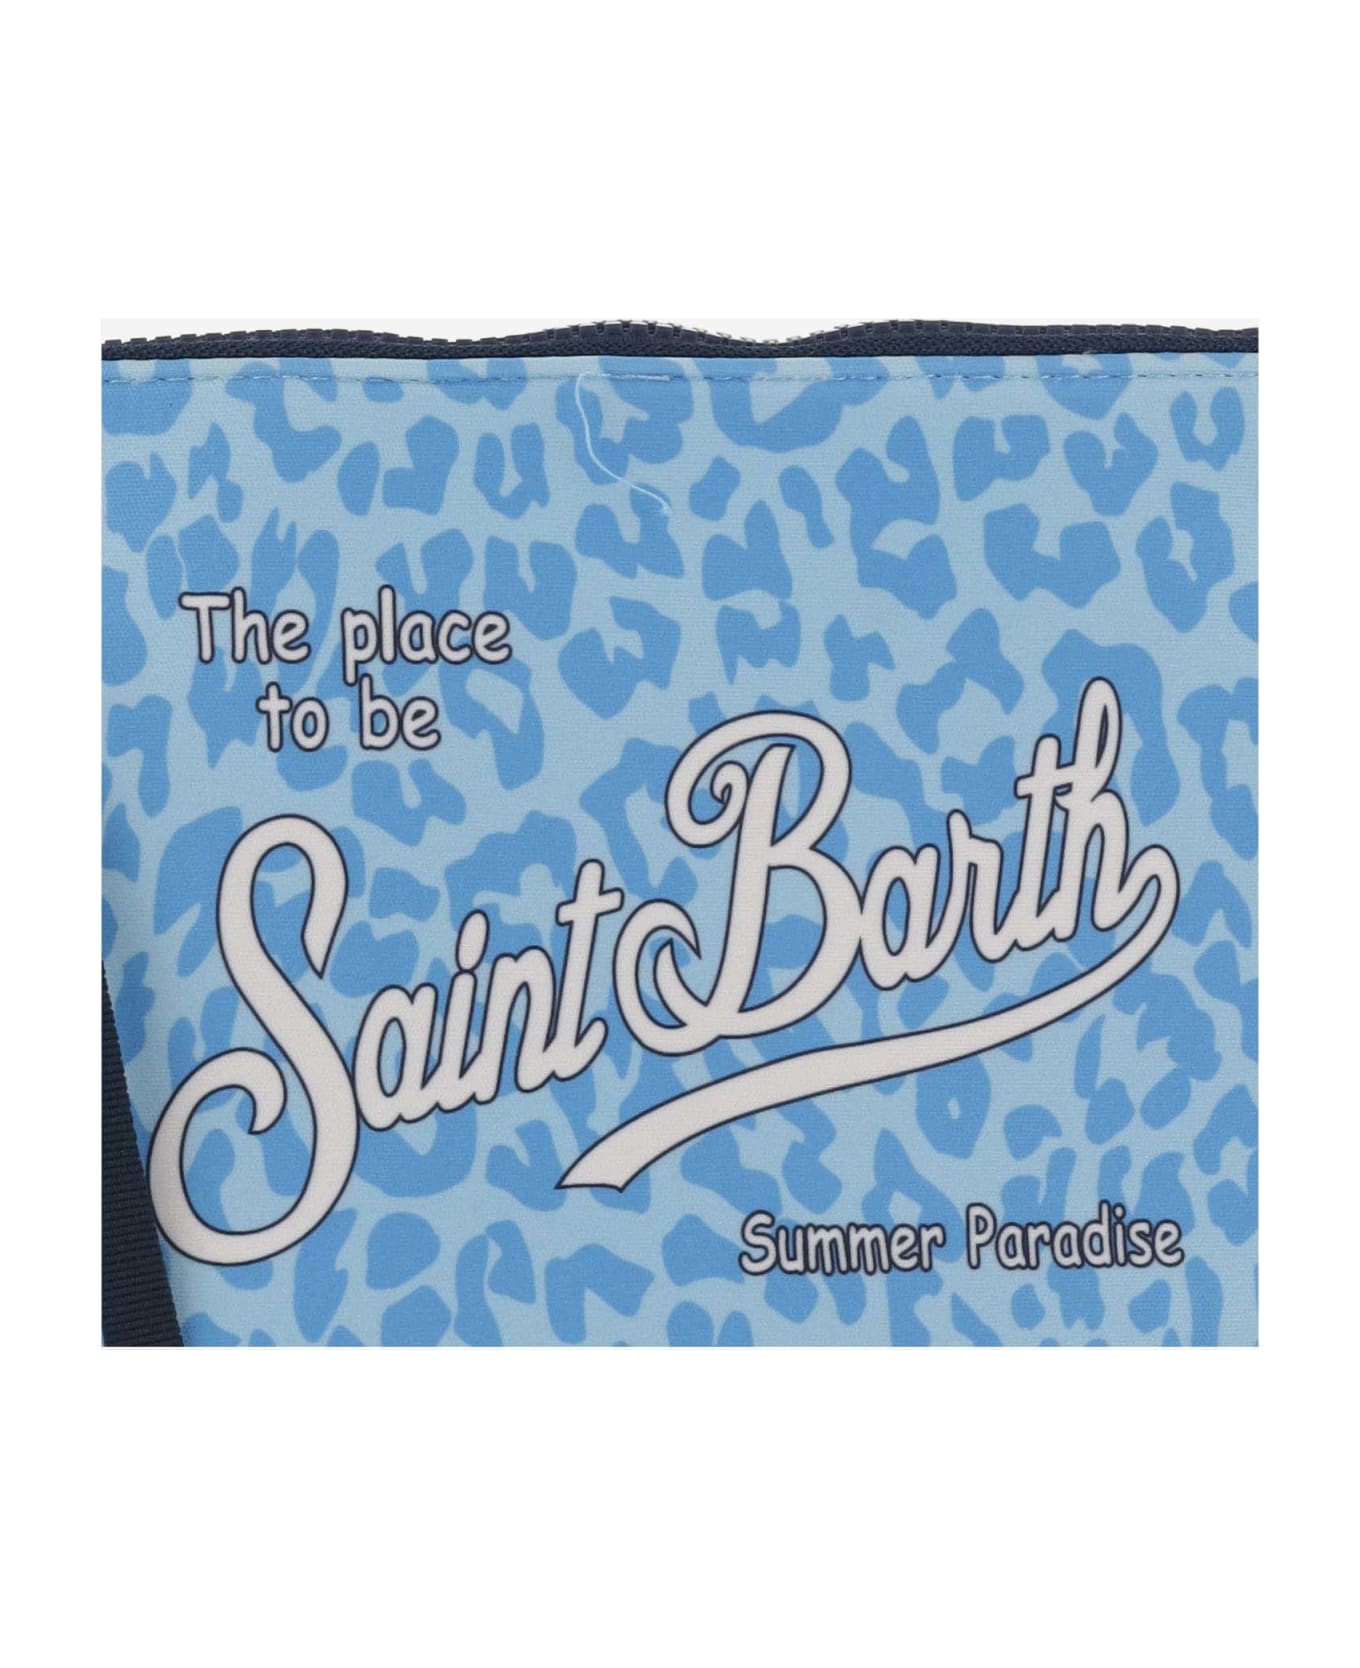 MC2 Saint Barth Scuba Clutch Bag With Graphic Print - Clear Blue クラッチバッグ